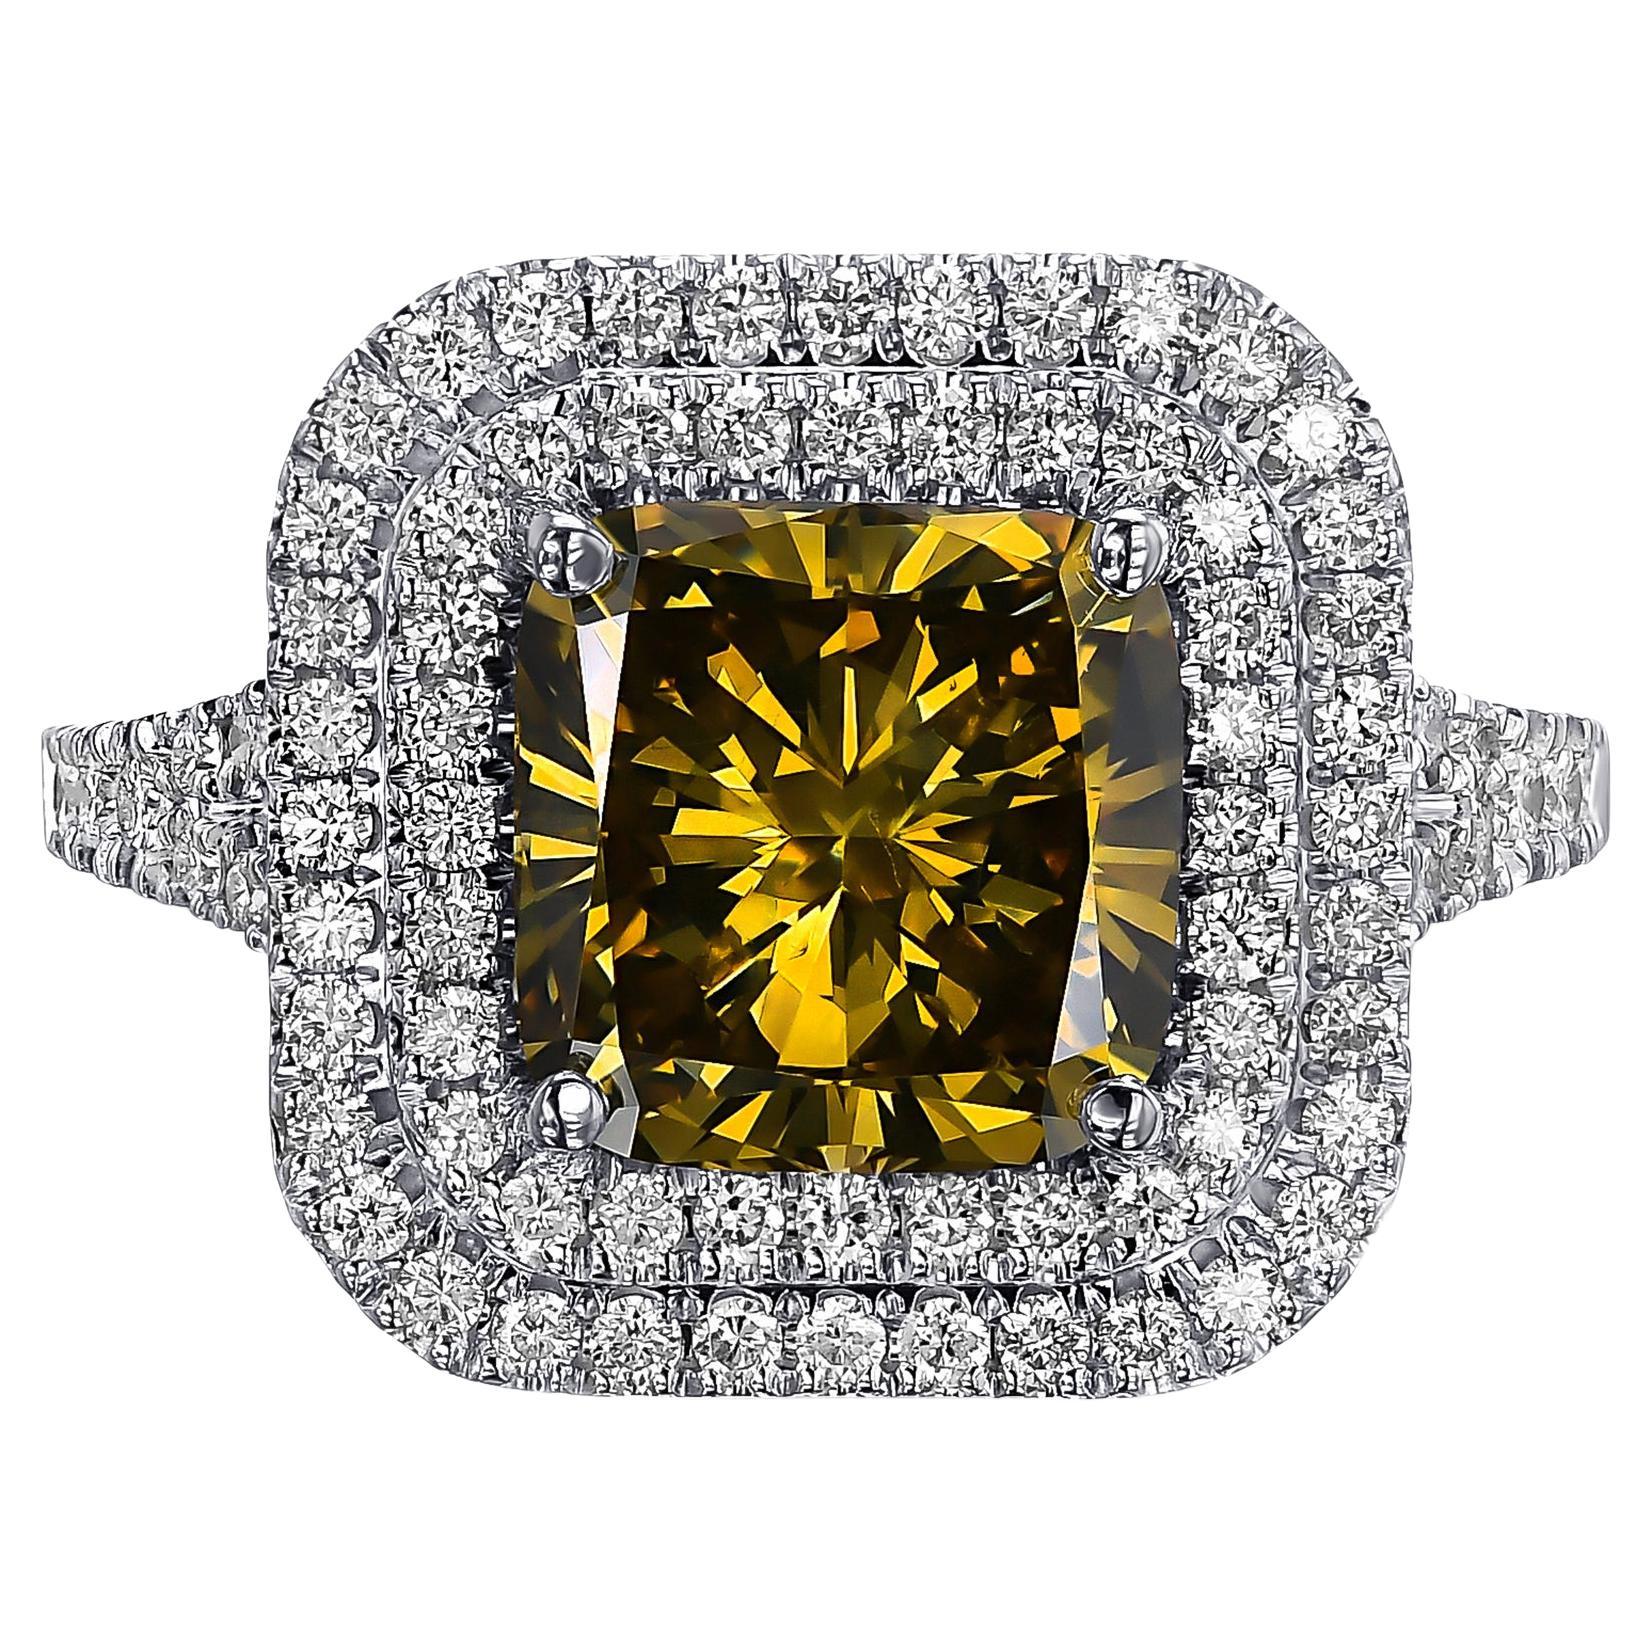 Today we are offering this amazing ring featuring a center 3.54 carat fancy deep brown yellow diamond with diamonds halo ring. 

A once in a lifetime opportunity to become the proud owner of this amazing ring. The ring has tremendous brilliance and